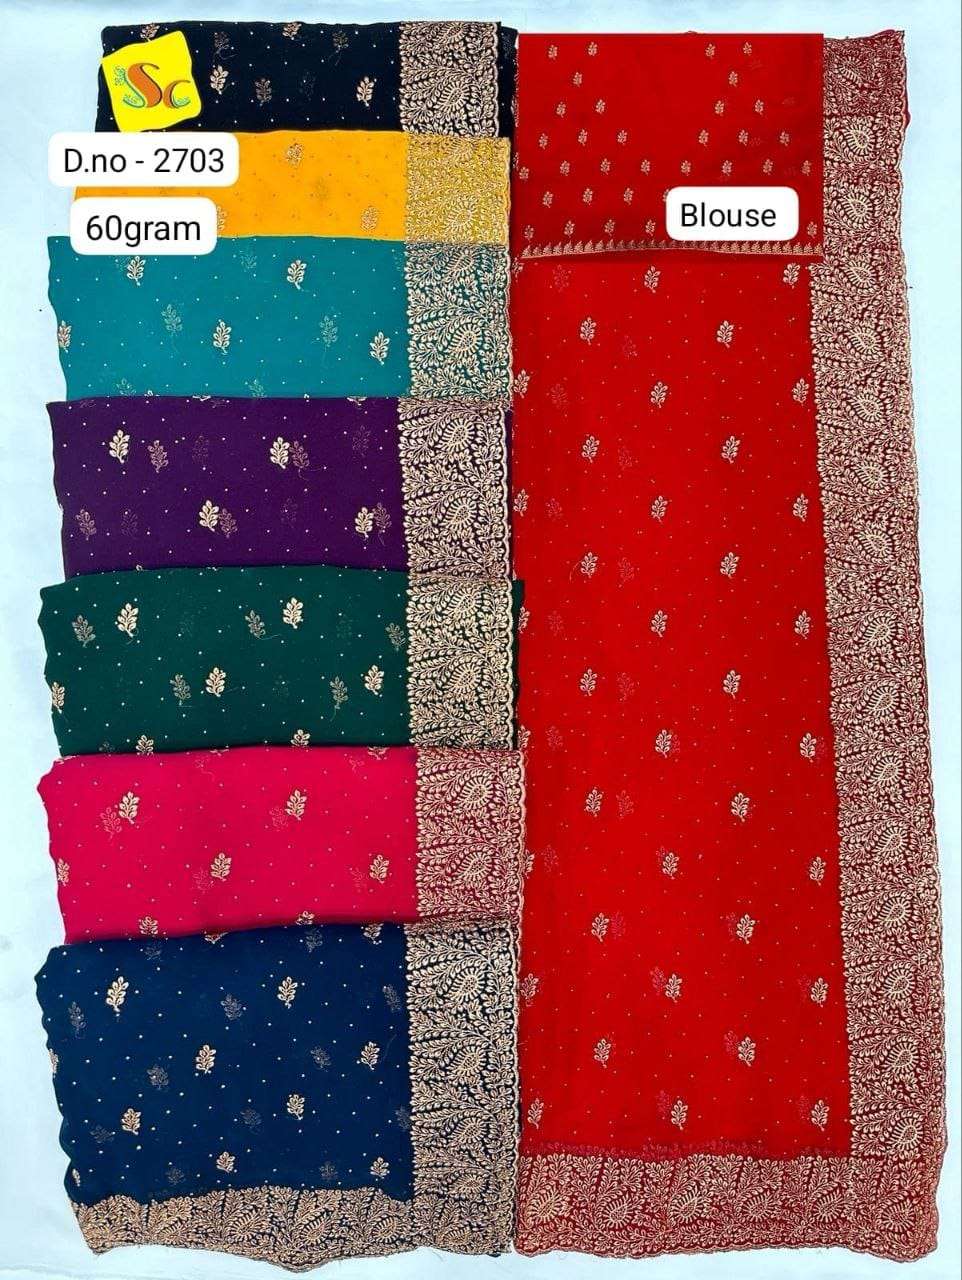 2703 COLOUR BY ASLIWHOLESALE DESIGNER PURE FANCY 60 GRAM EMBROIDERY SAREES